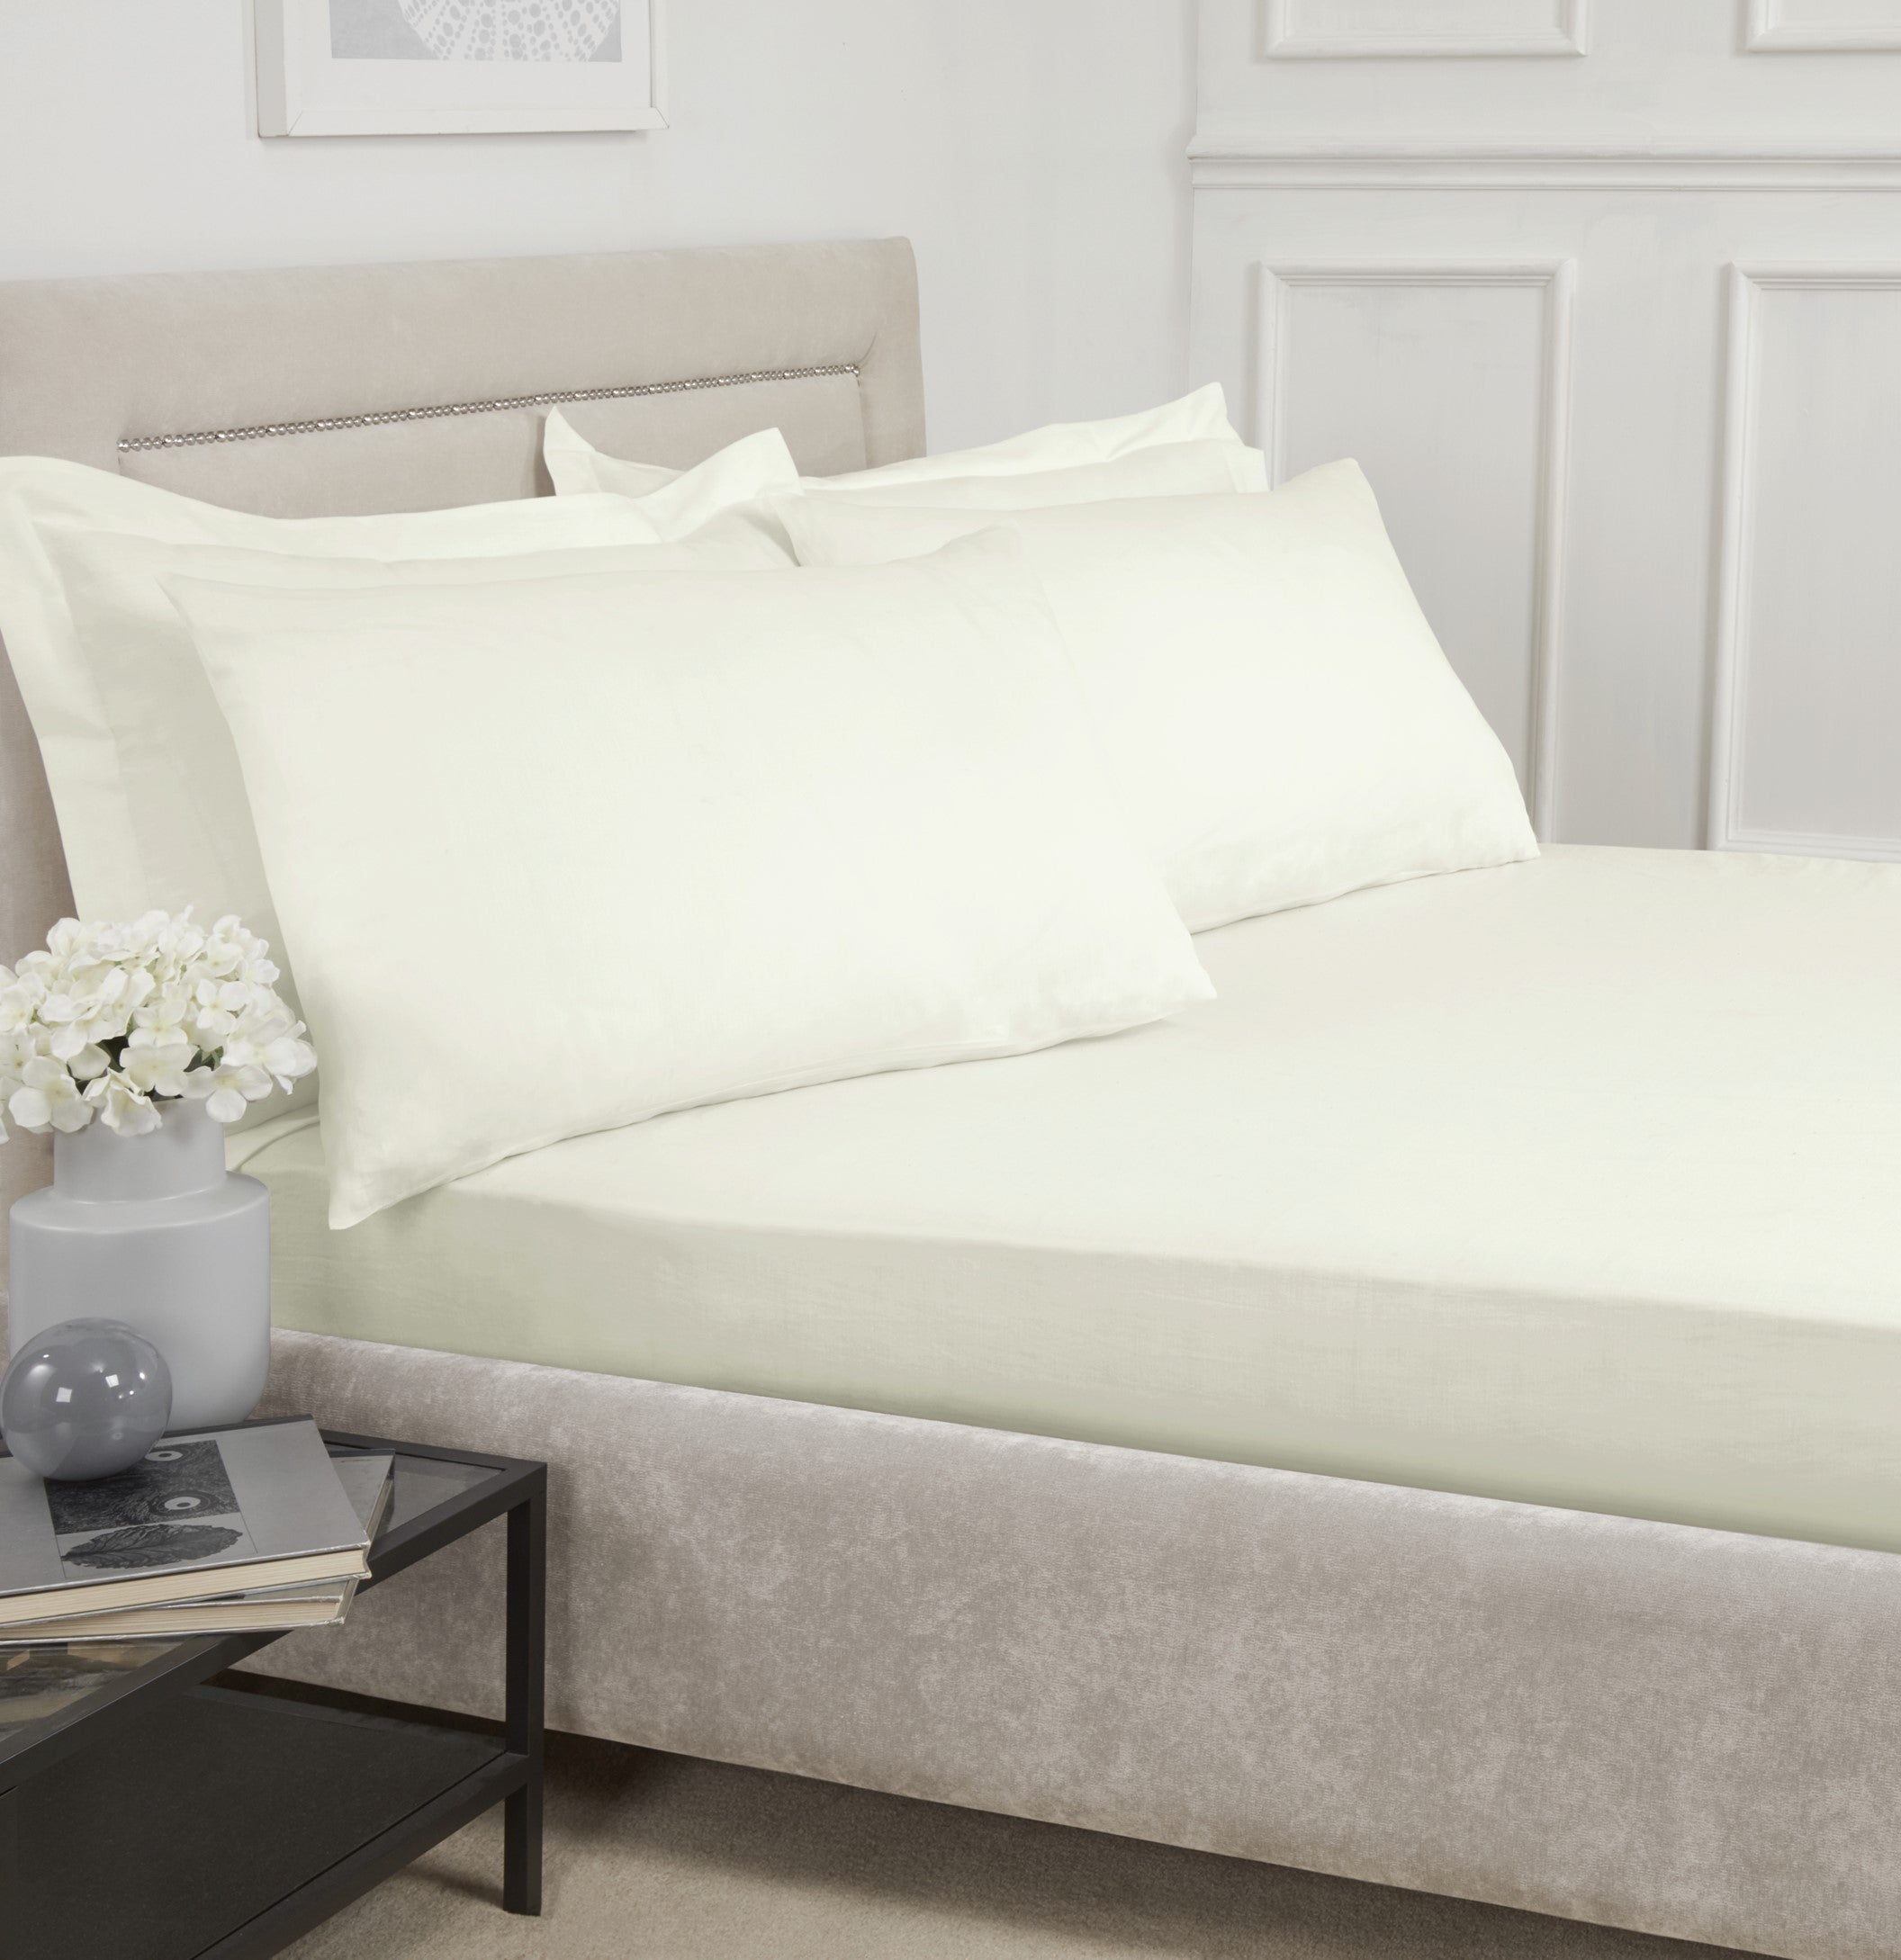 Lewis’s 100% Cotton Fitted Bedding Range - Cream - Housewife Pillowcase Pair  | TJ Hughes